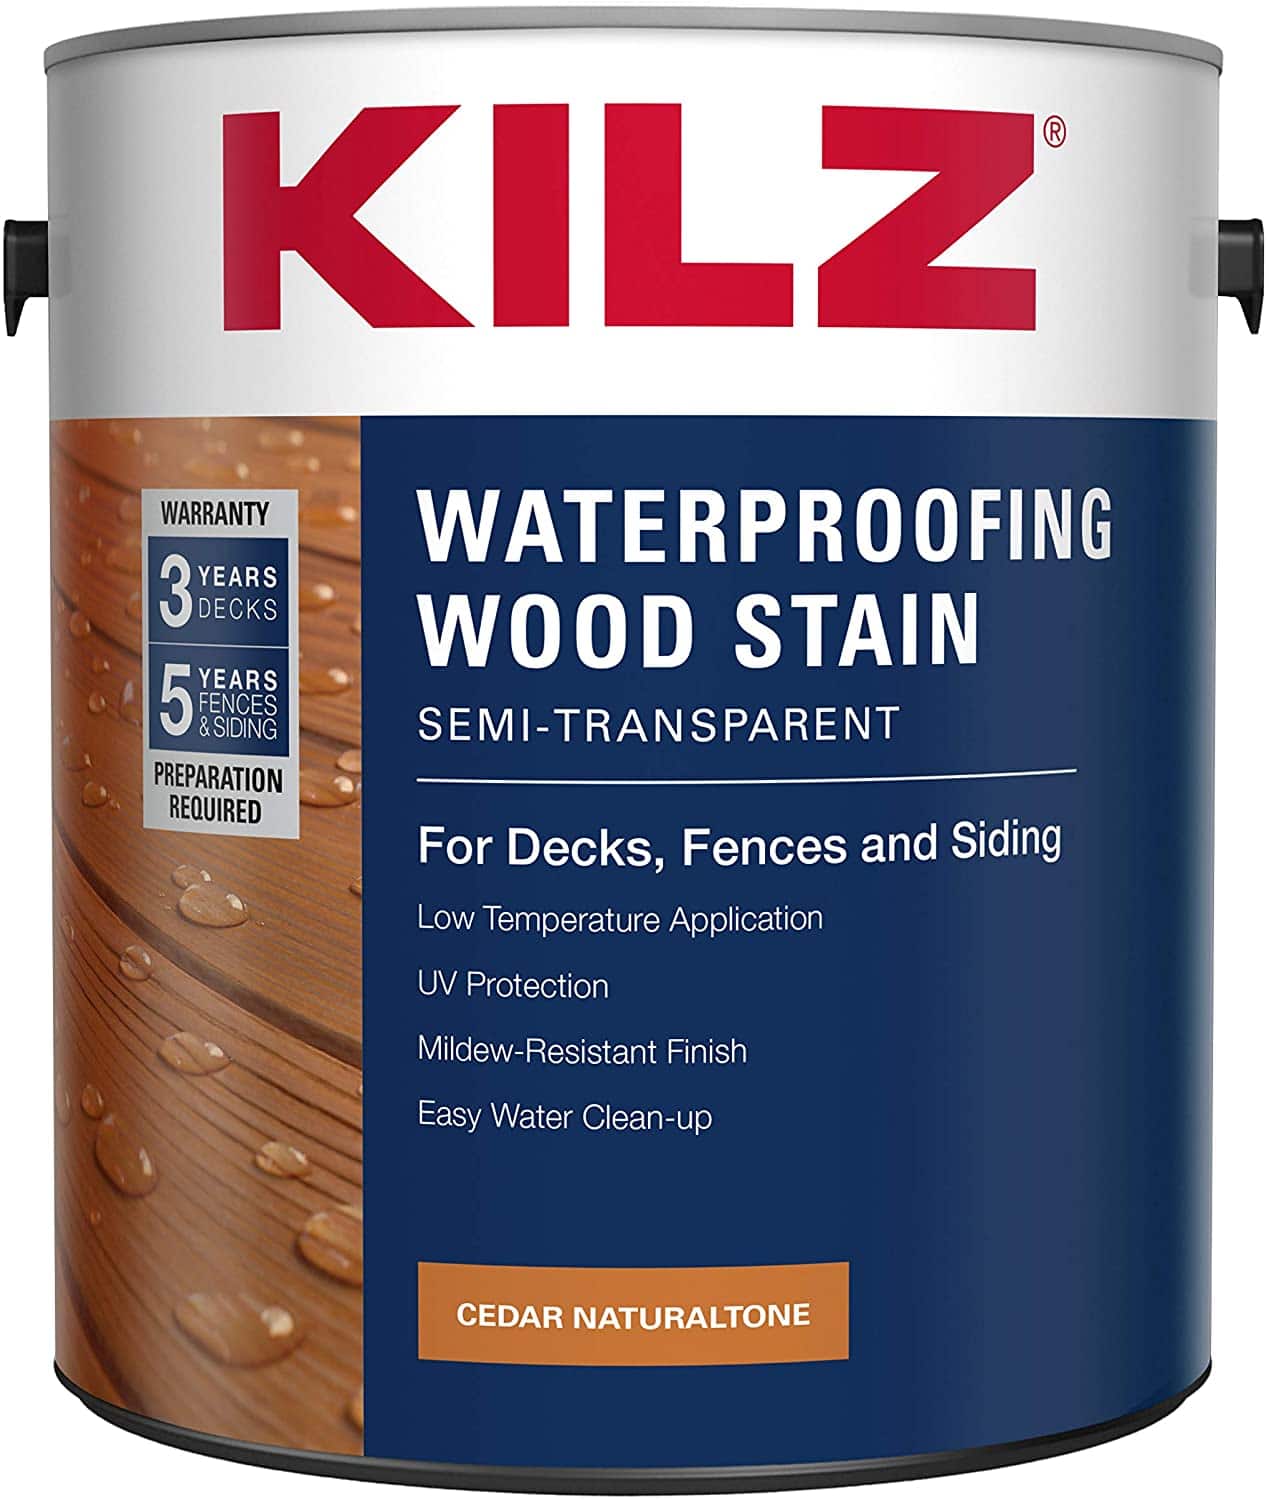 KILZ L832111 Exterior Waterproofing Wood Stain review